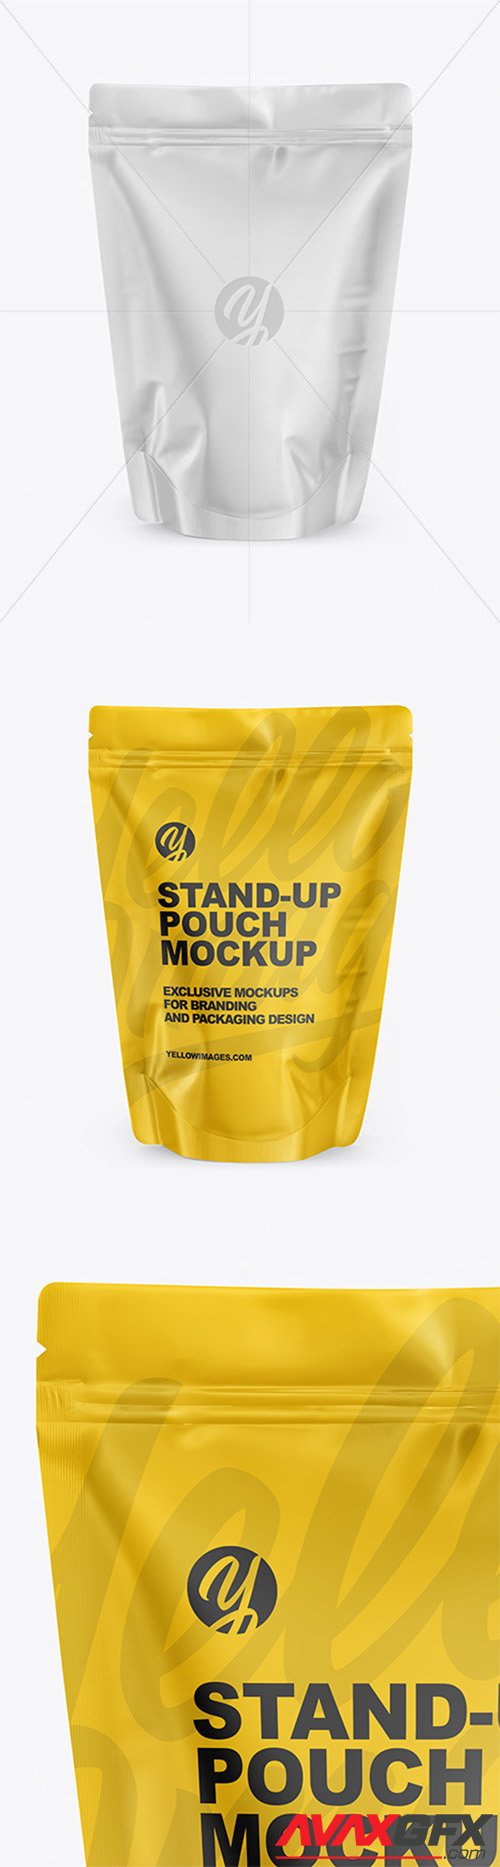 Glossy Stand-Up Pouch Mockup 64892